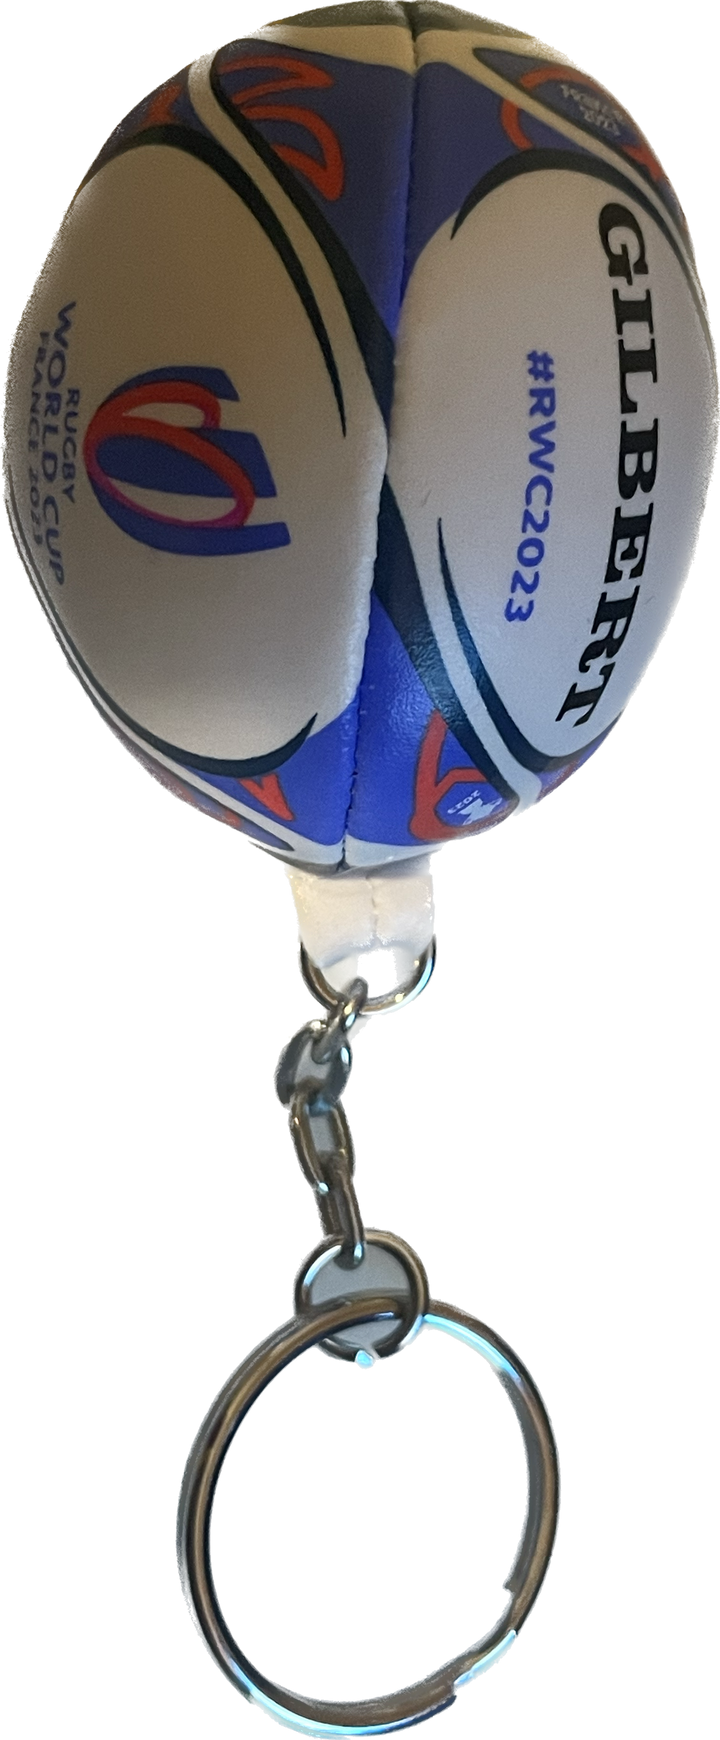 Rugby ball keychain, 2023 Gilbert collection